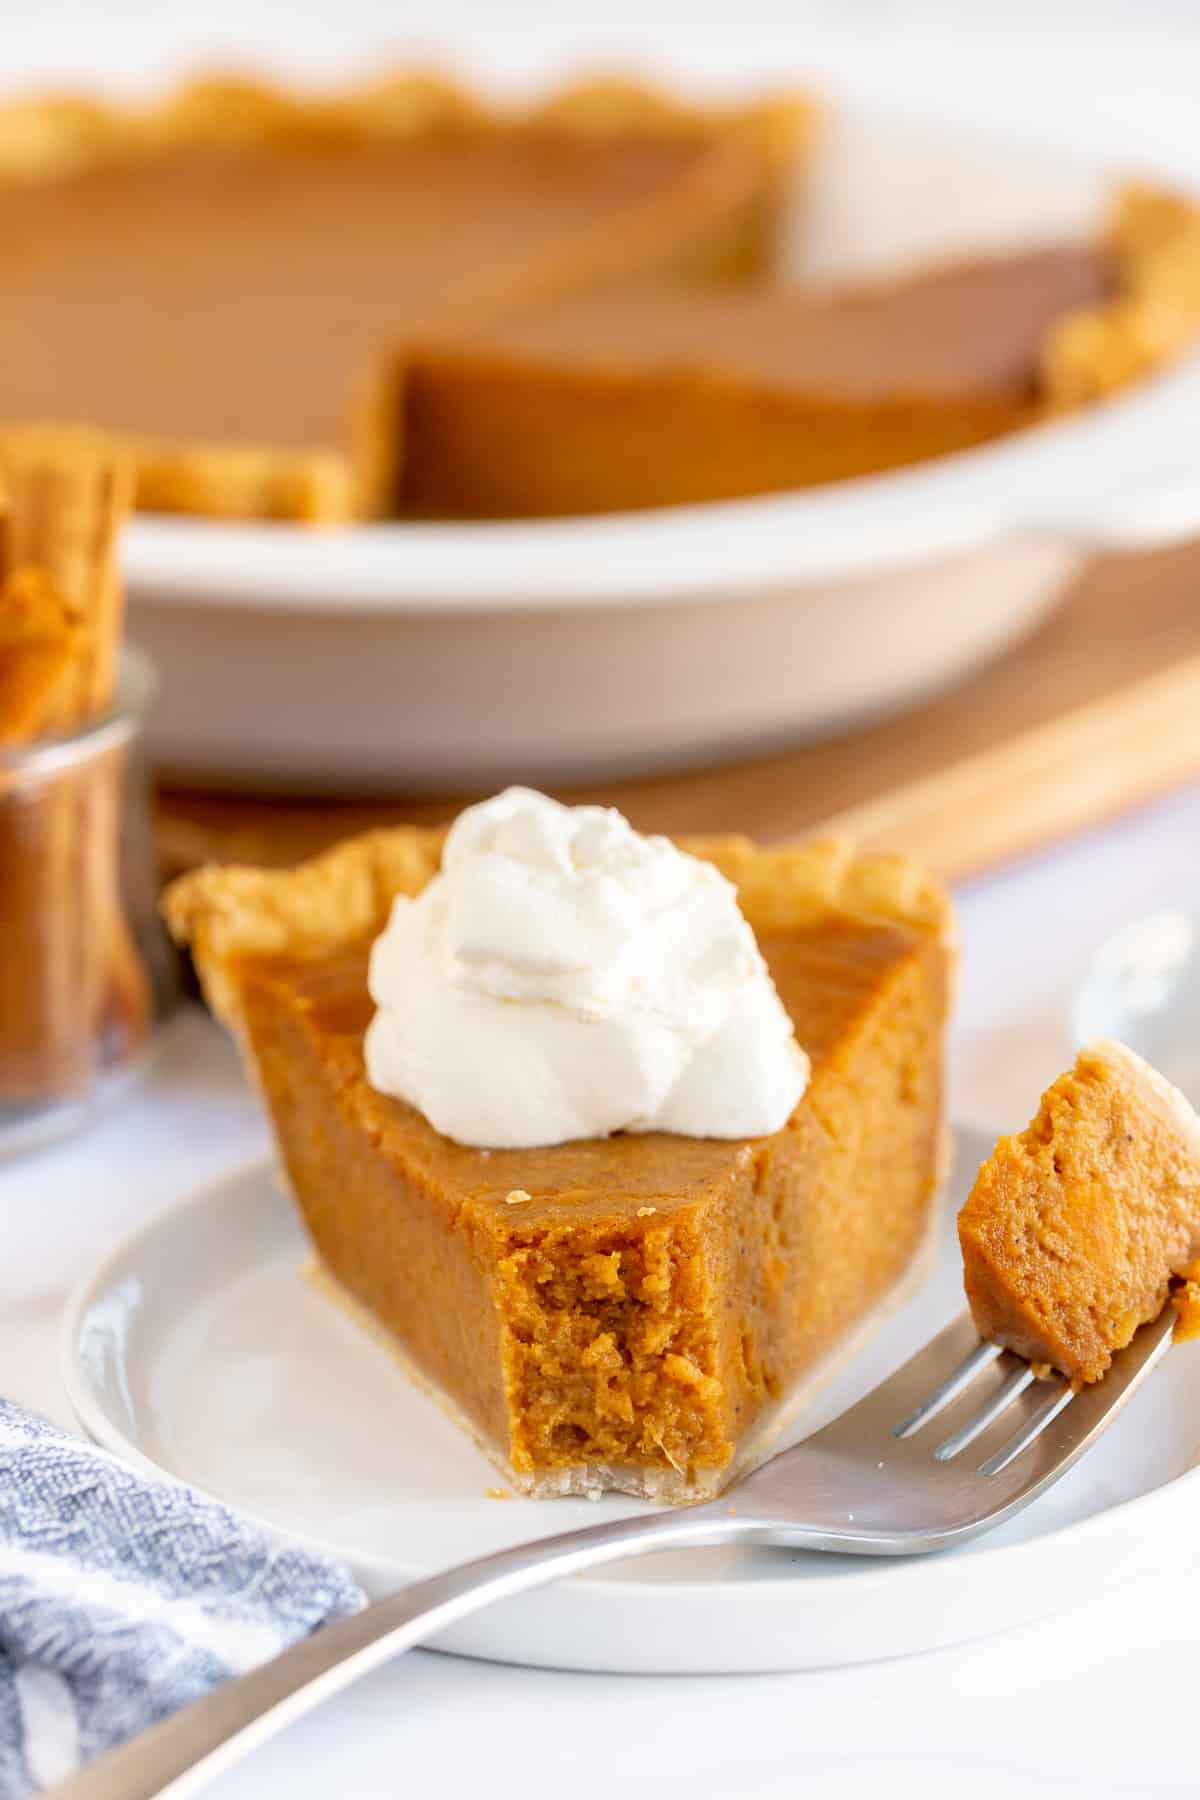 A slice of sweet potato pie on a plate with a fork.